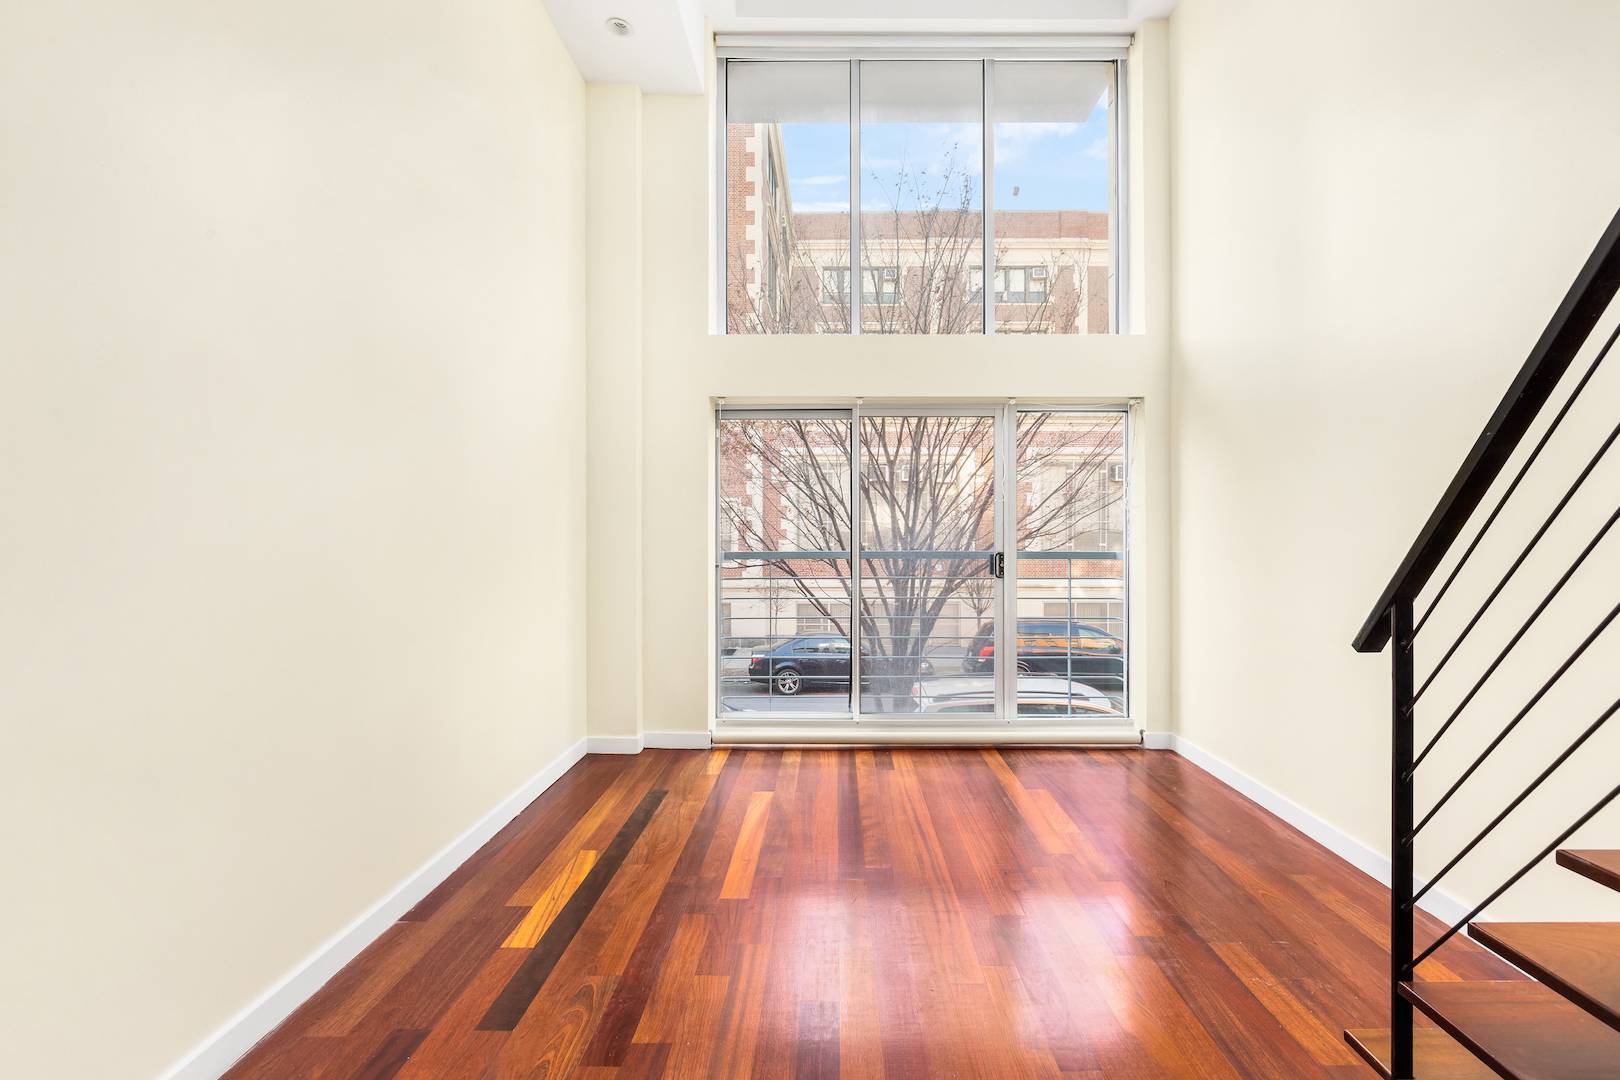 Welcome to Warren Lofts Apartment 201, an airy duplex residence with south facing floor to ceiling windows, cantilevered staircase, 14' 7 ceiling and cherry wood floors.